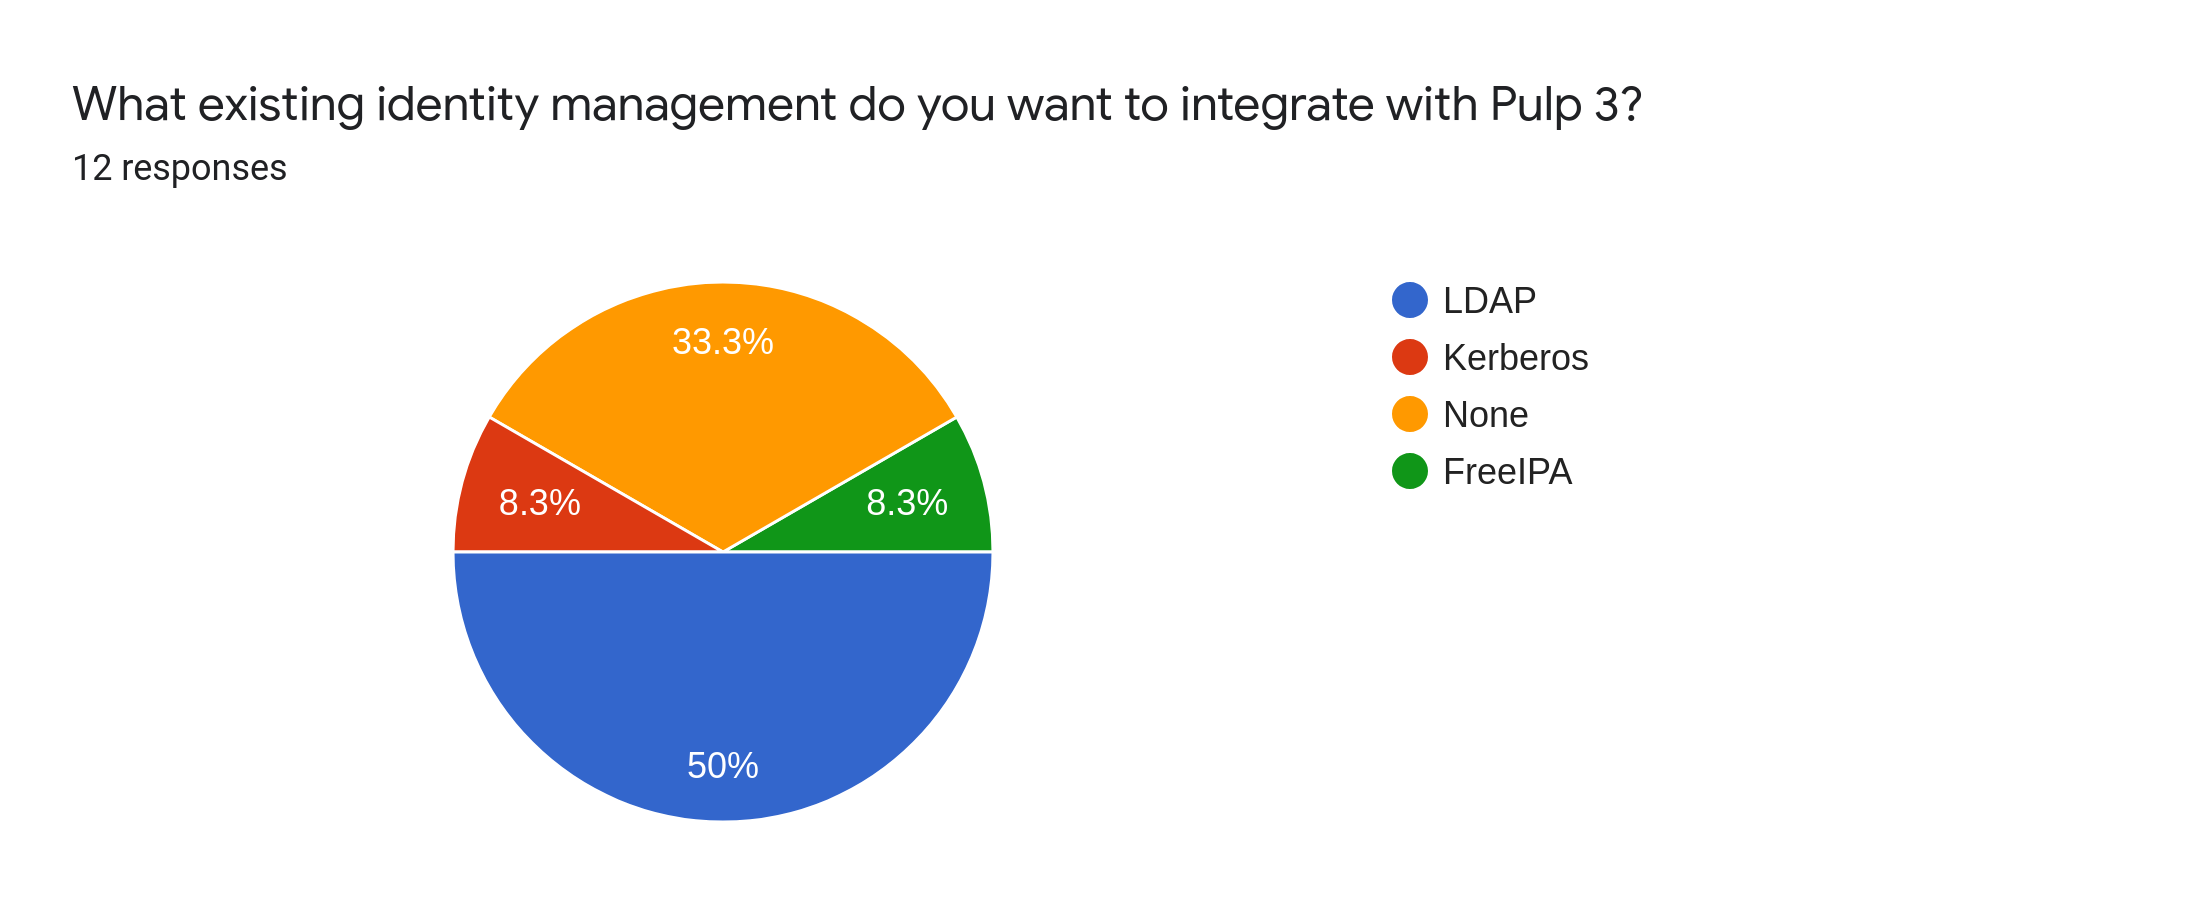 What existing identity management do you want to integrate with Pulp 3?